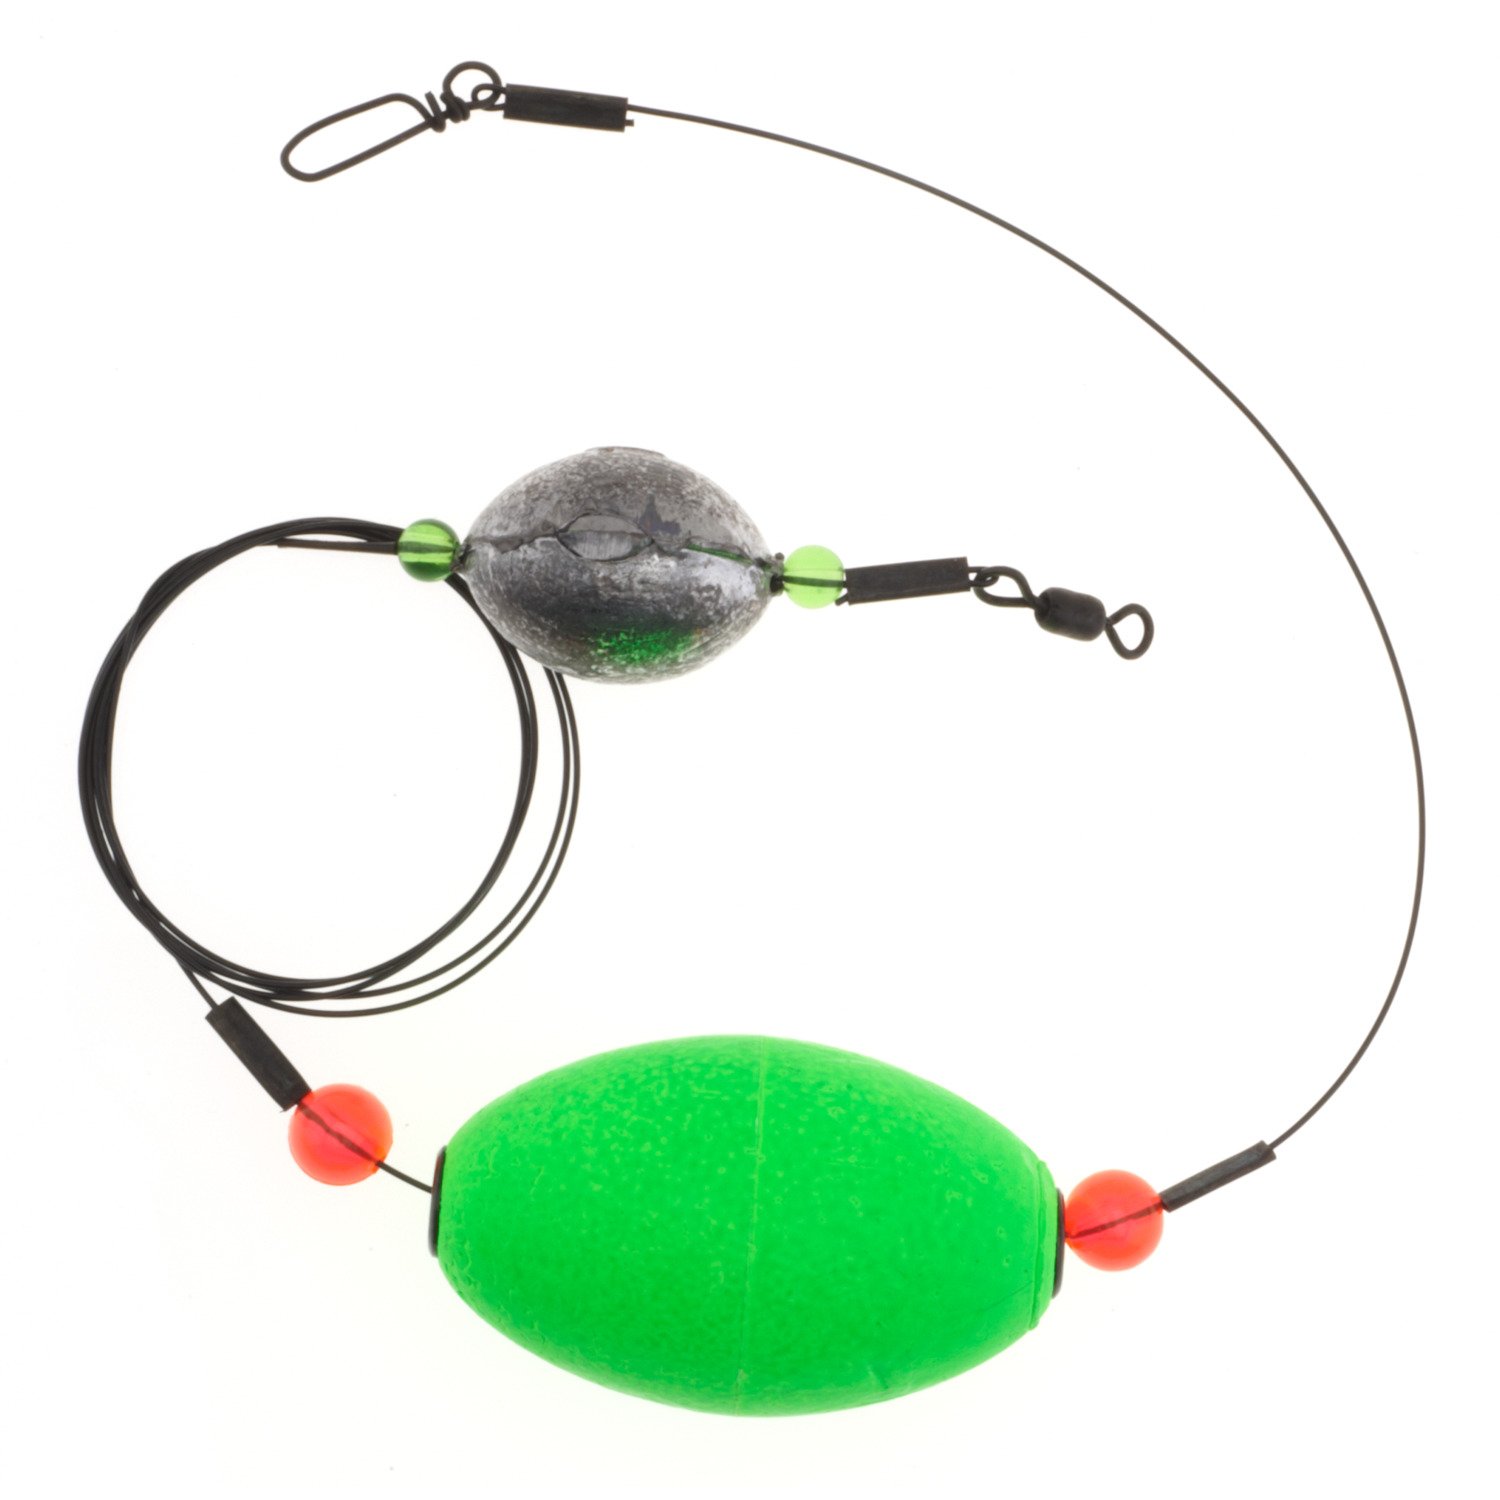 Fishing Rigs: Popping Cork Rigs & More